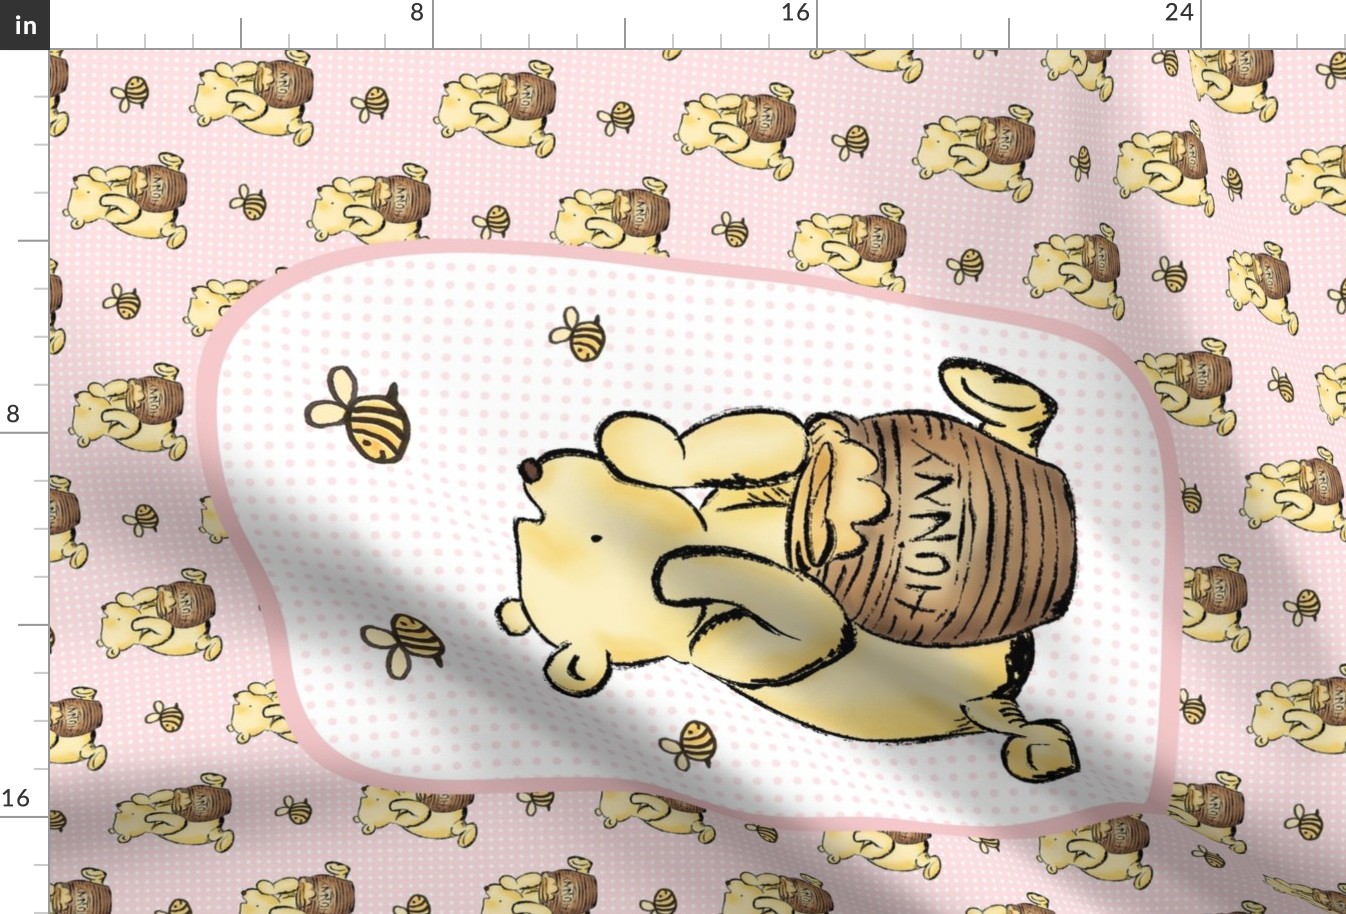 Large 27x18 Fat Quarter Panel Classic Winnie The Pooh Hunny Pot on Pale Pink for Wall Hanging or Tea Towel